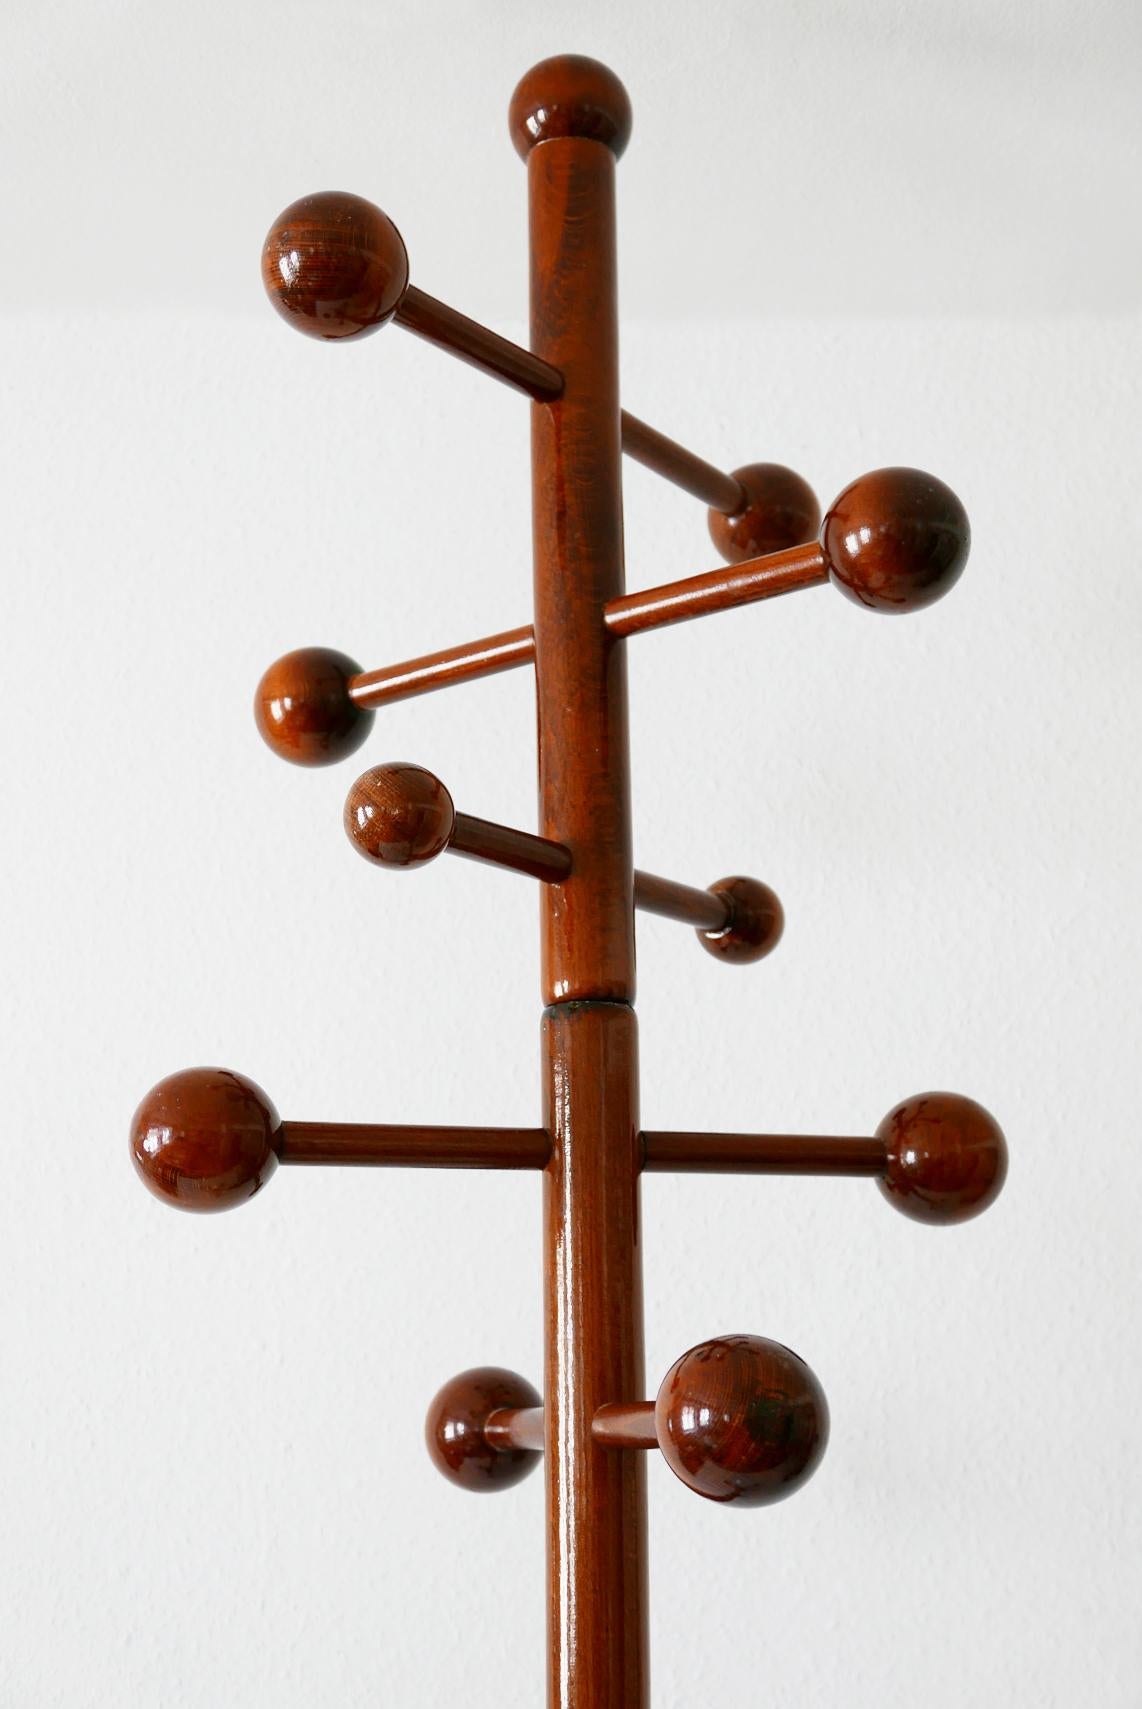 Exceptional and highly decorative Mid-Century Modern atomic or Sputnik coat tree or Stand. Designed and manufactured probably in Denmark, 1960s.

Executed in clear lacquered massive beach. Can be disassembled in three parts.

Dimensions:
Height